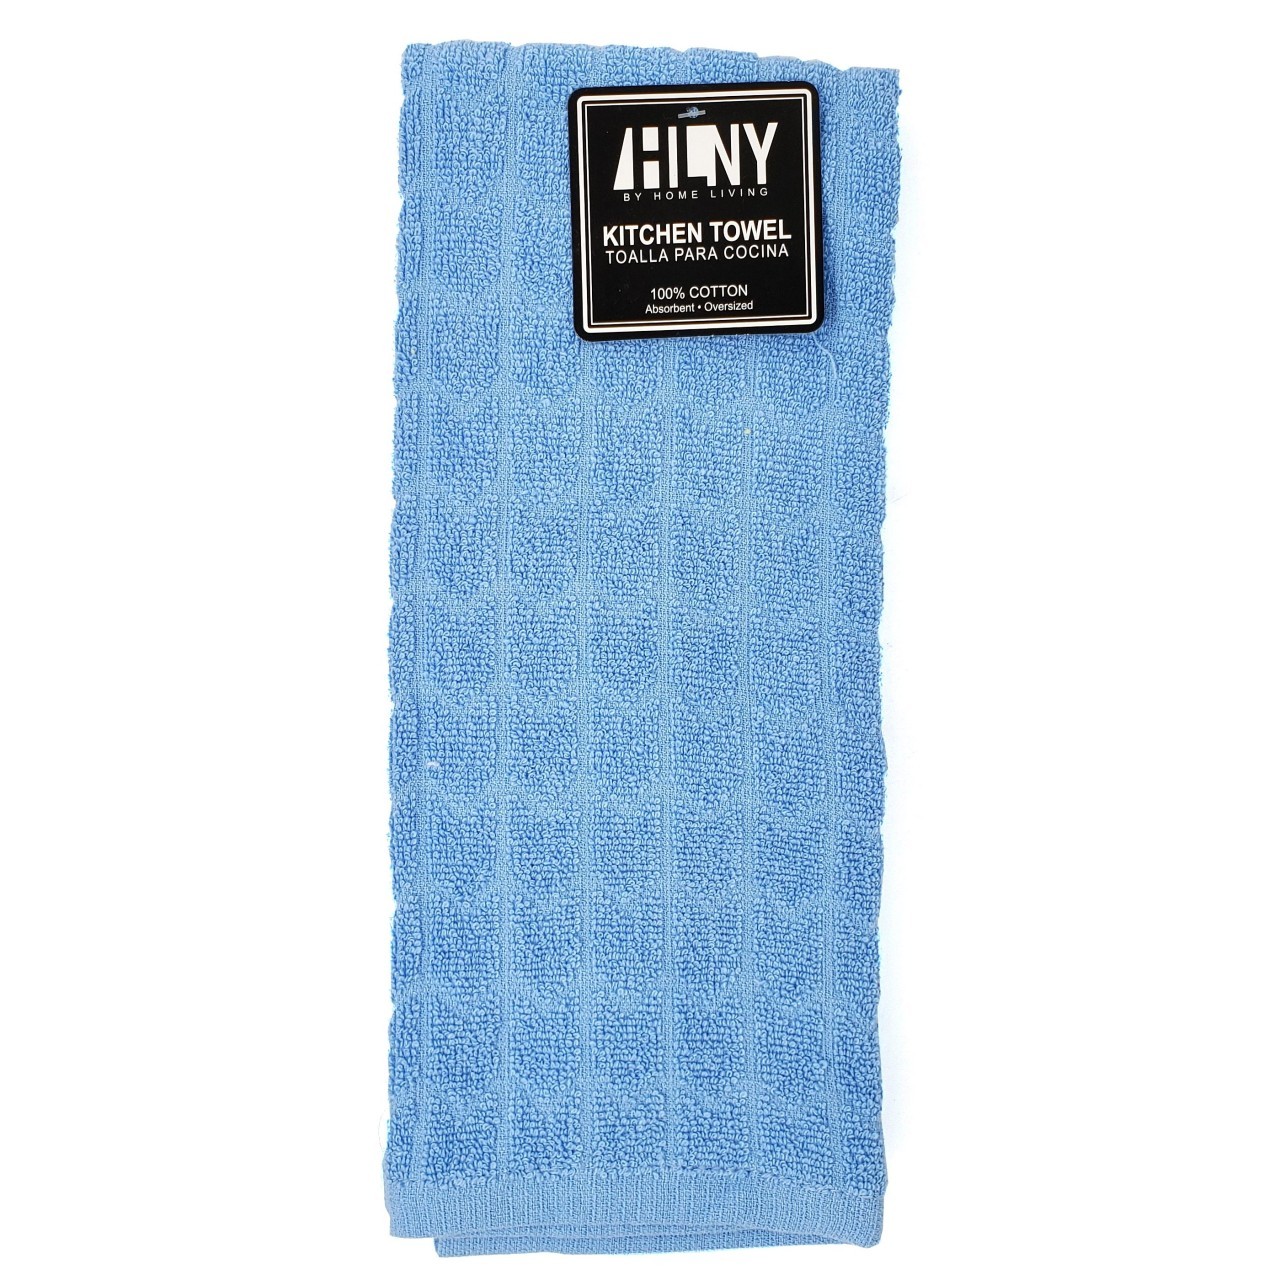 HOME LIVING KITCHEN TOWEL BLUE 1ct